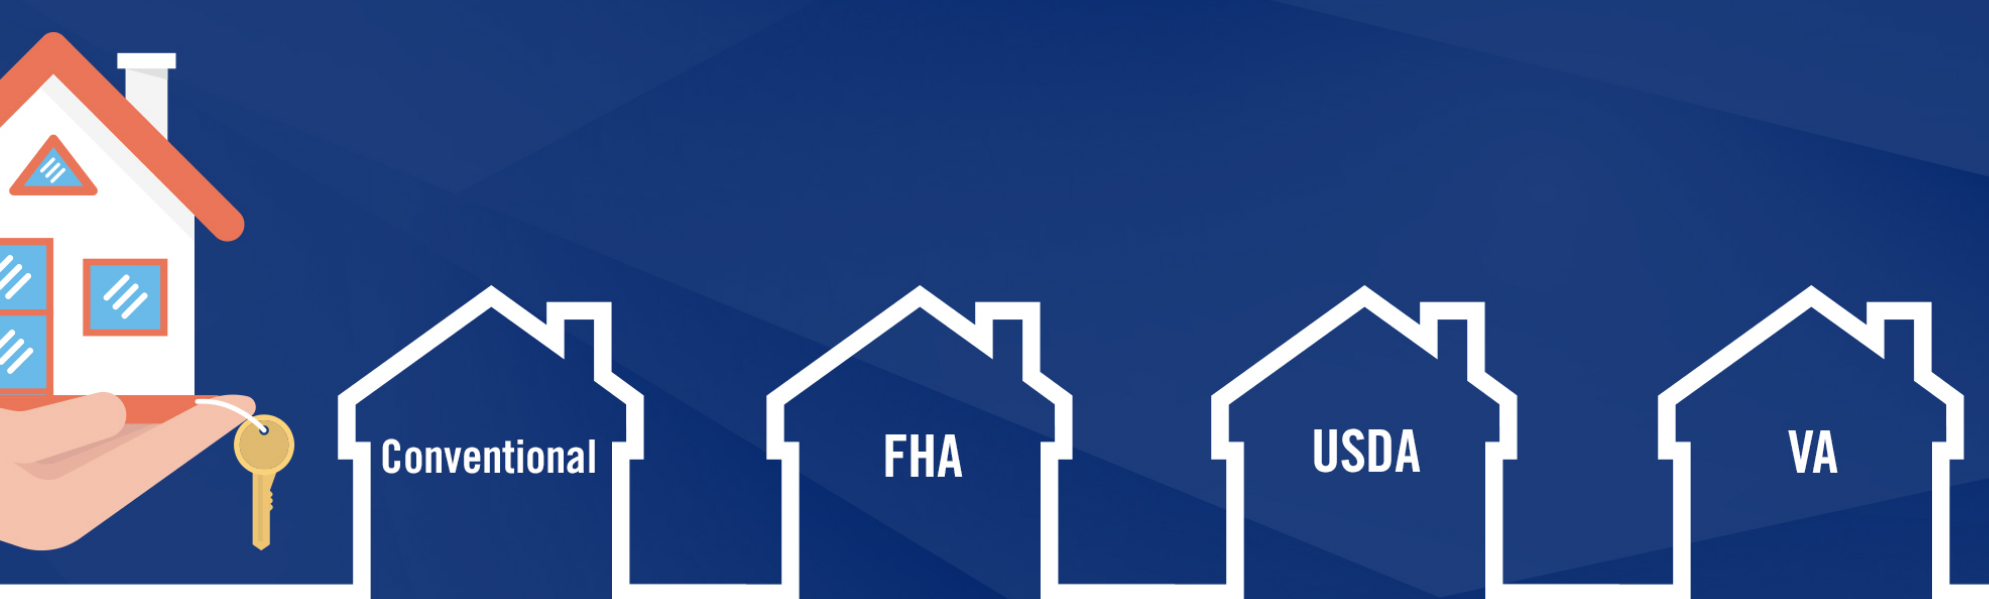 a vector hero image of multiple houses with various descriptions such as conventional, FHA, USDA, VA